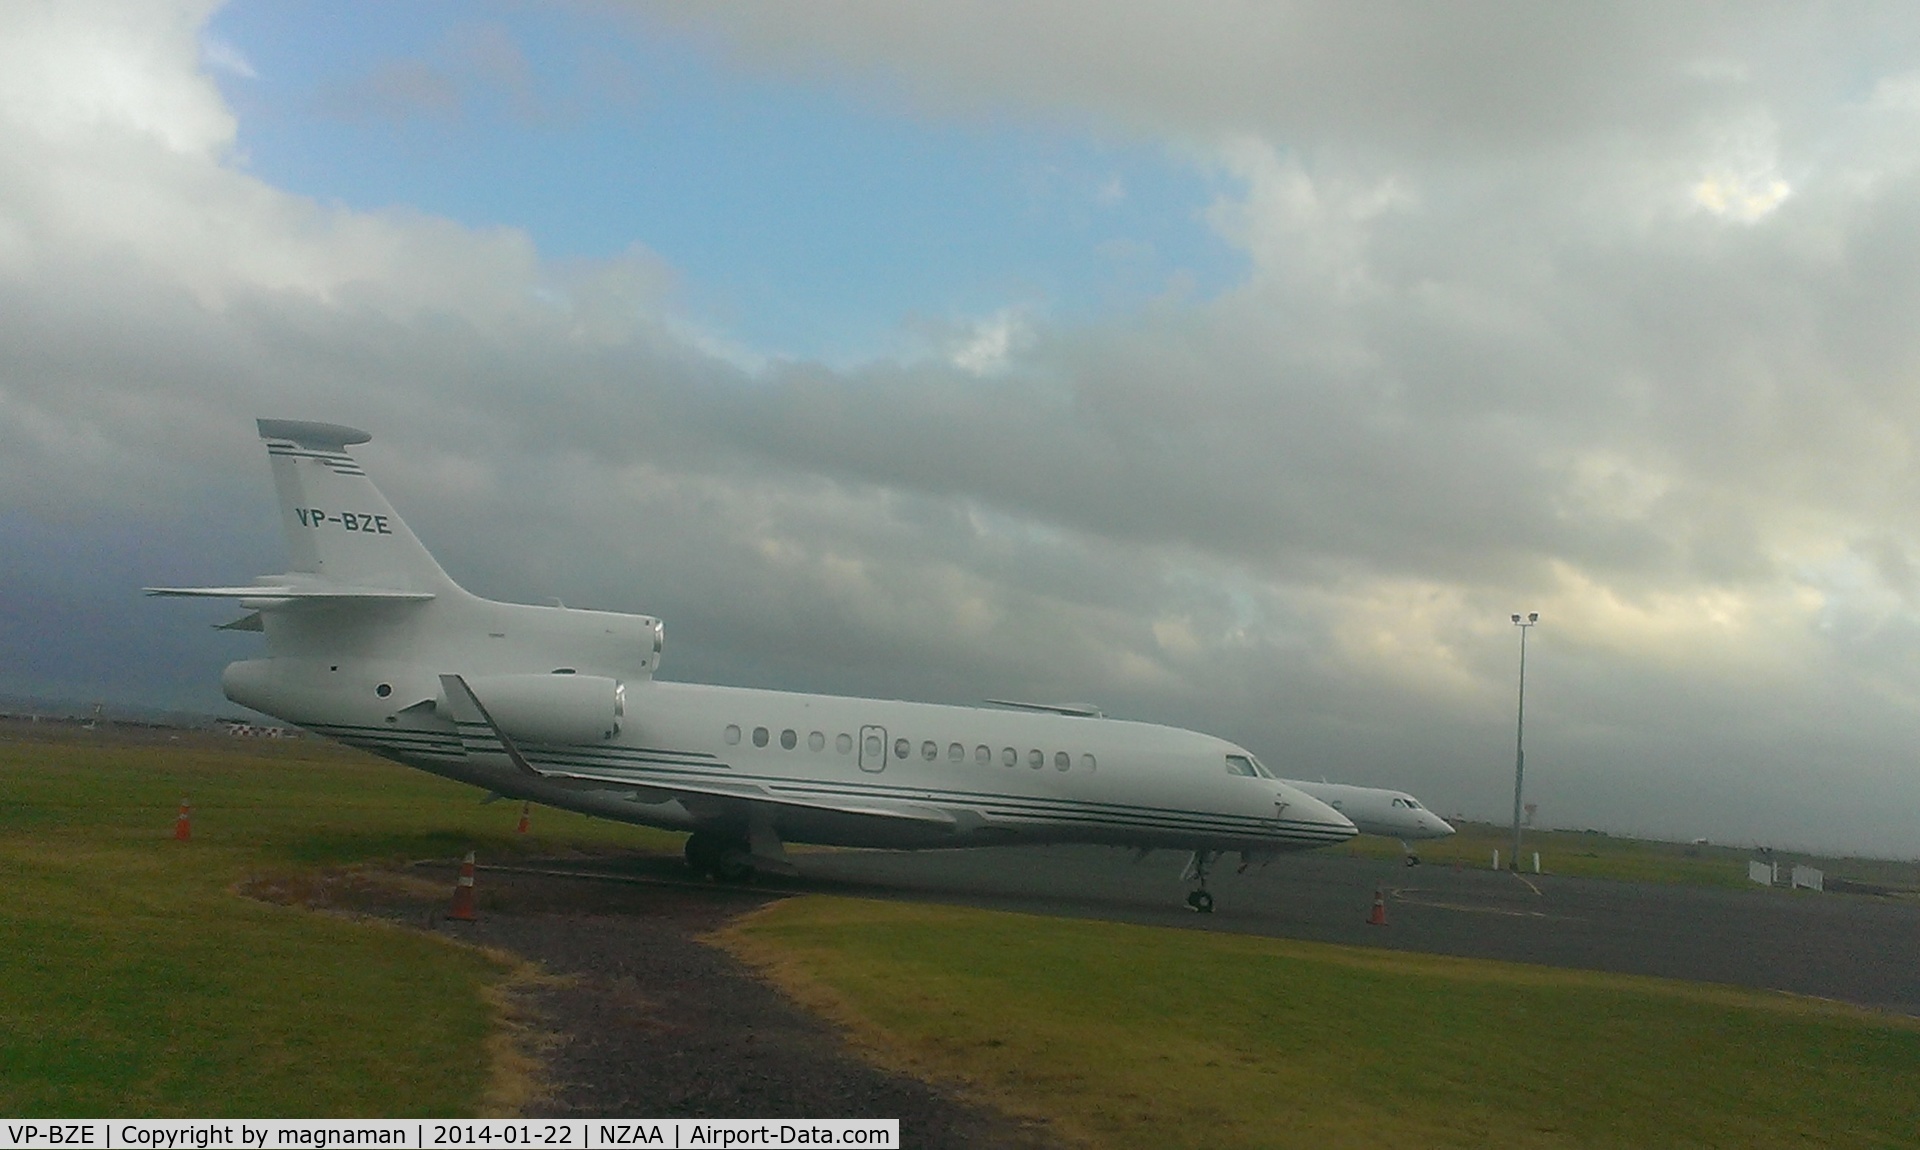 VP-BZE, 2007 Dassault Falcon 7X C/N 14, Falcon 7X getting very common. Still not sure what is difference to Falcon 900.